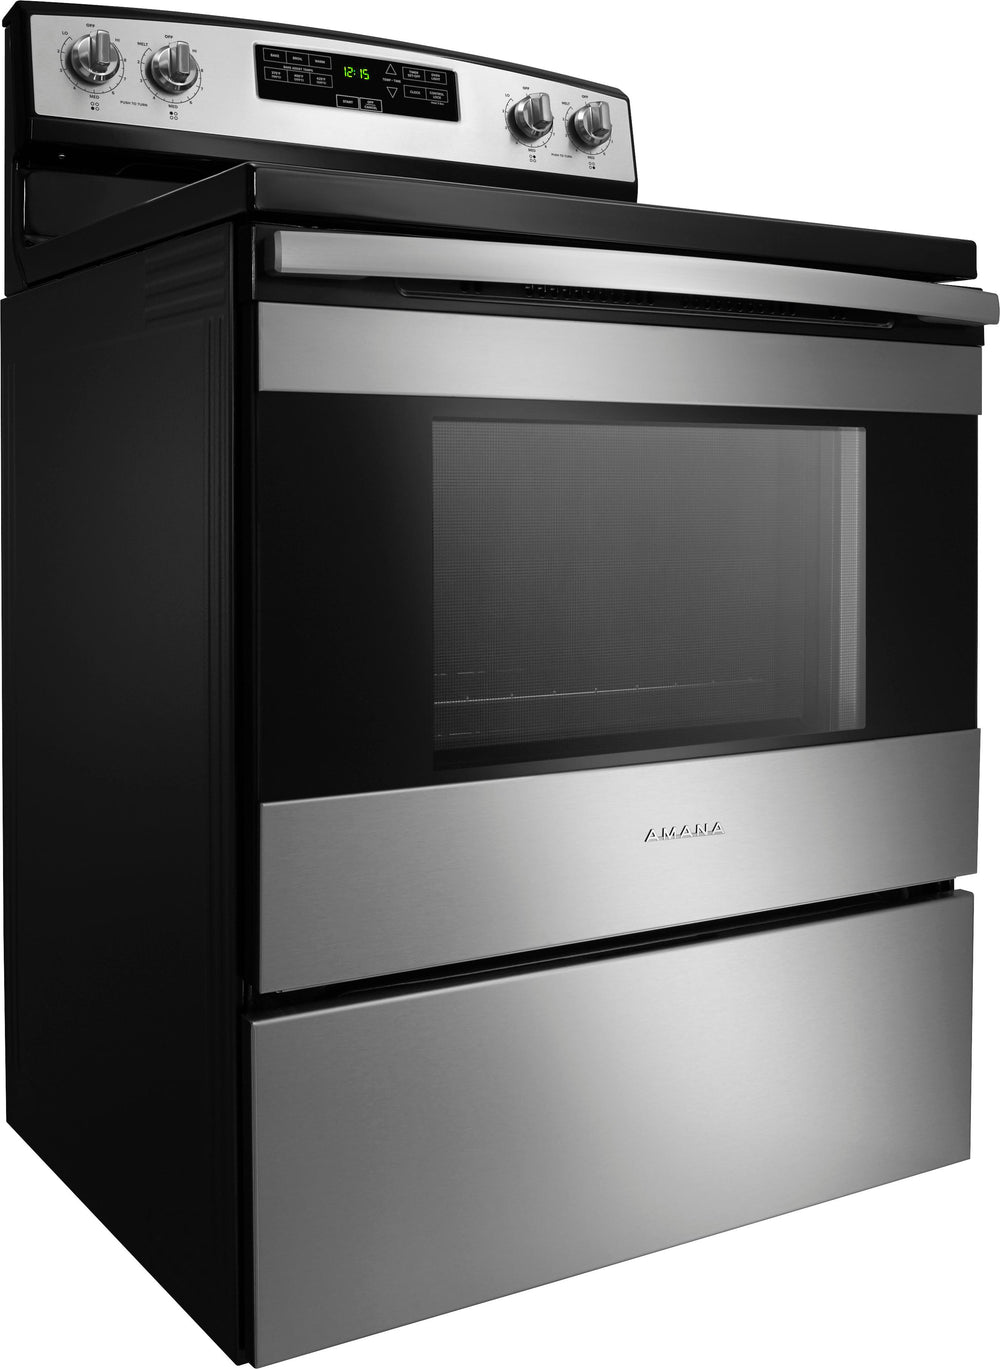 Amana - 4.8 Cu. Ft. Freestanding Electric Range - Stainless steel_1